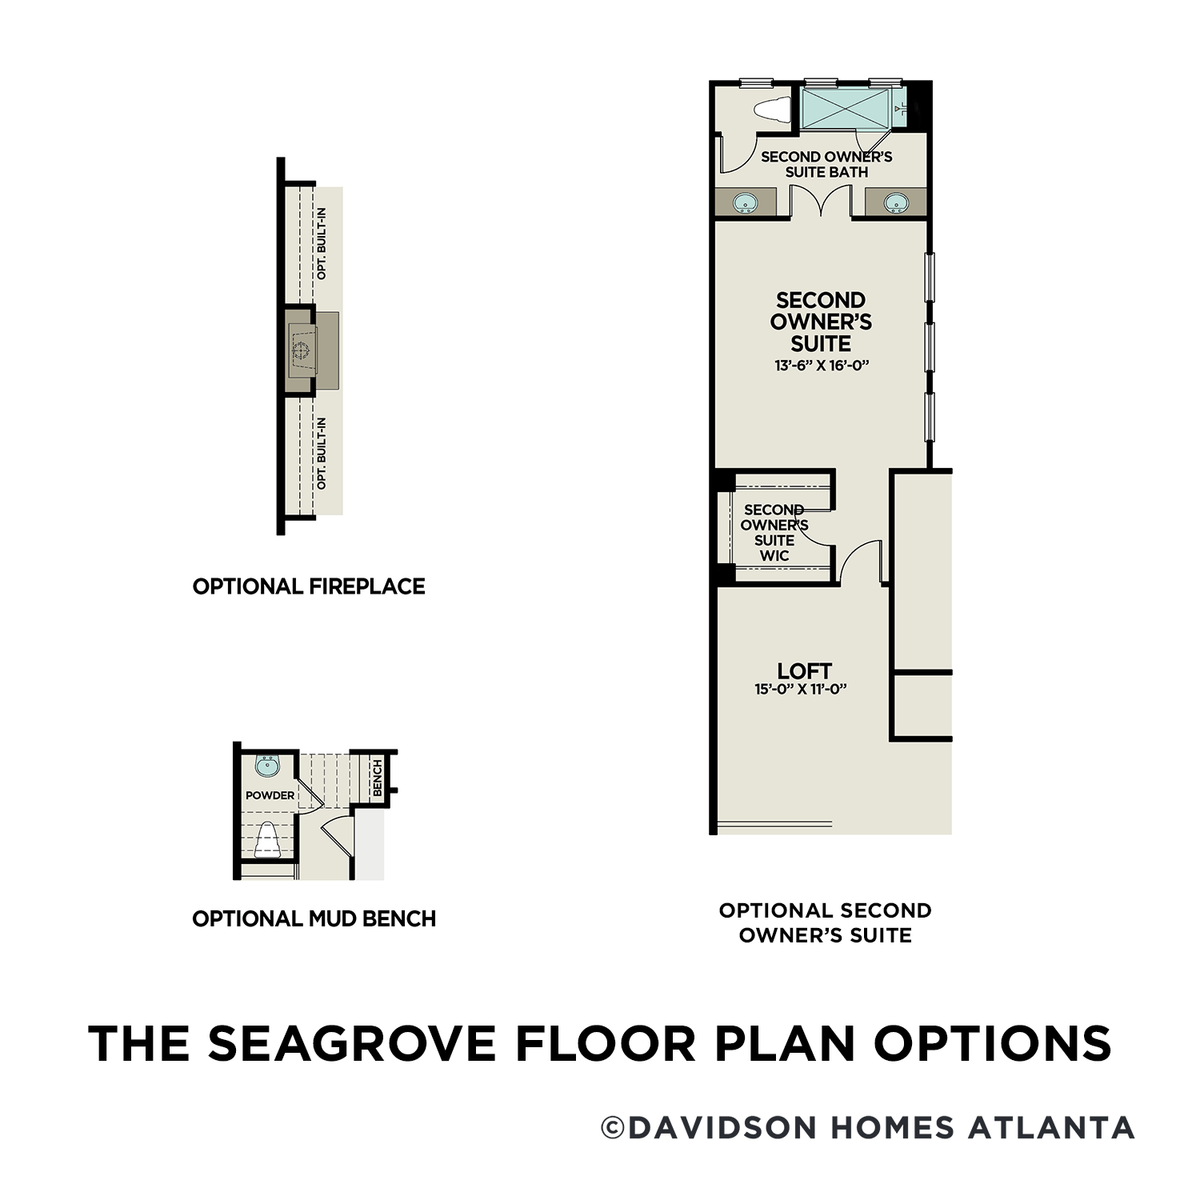 3 - The Seagrove B floor plan layout for 692 Stickley Oak Way in Davidson Homes' The Village at Towne Lake community.